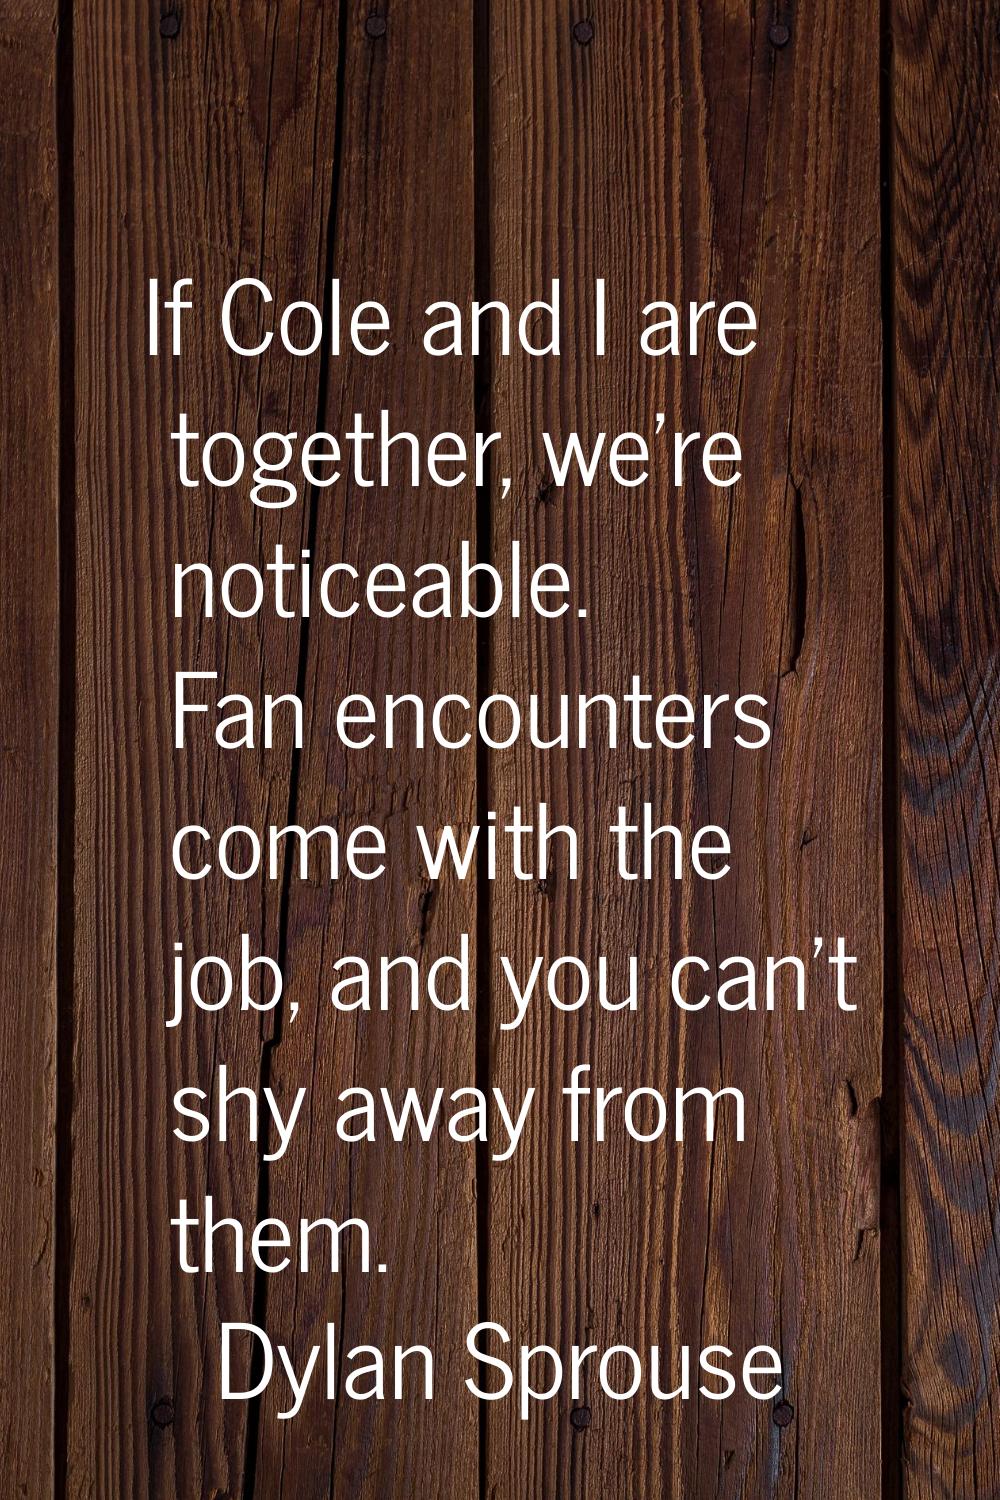 If Cole and I are together, we're noticeable. Fan encounters come with the job, and you can't shy a